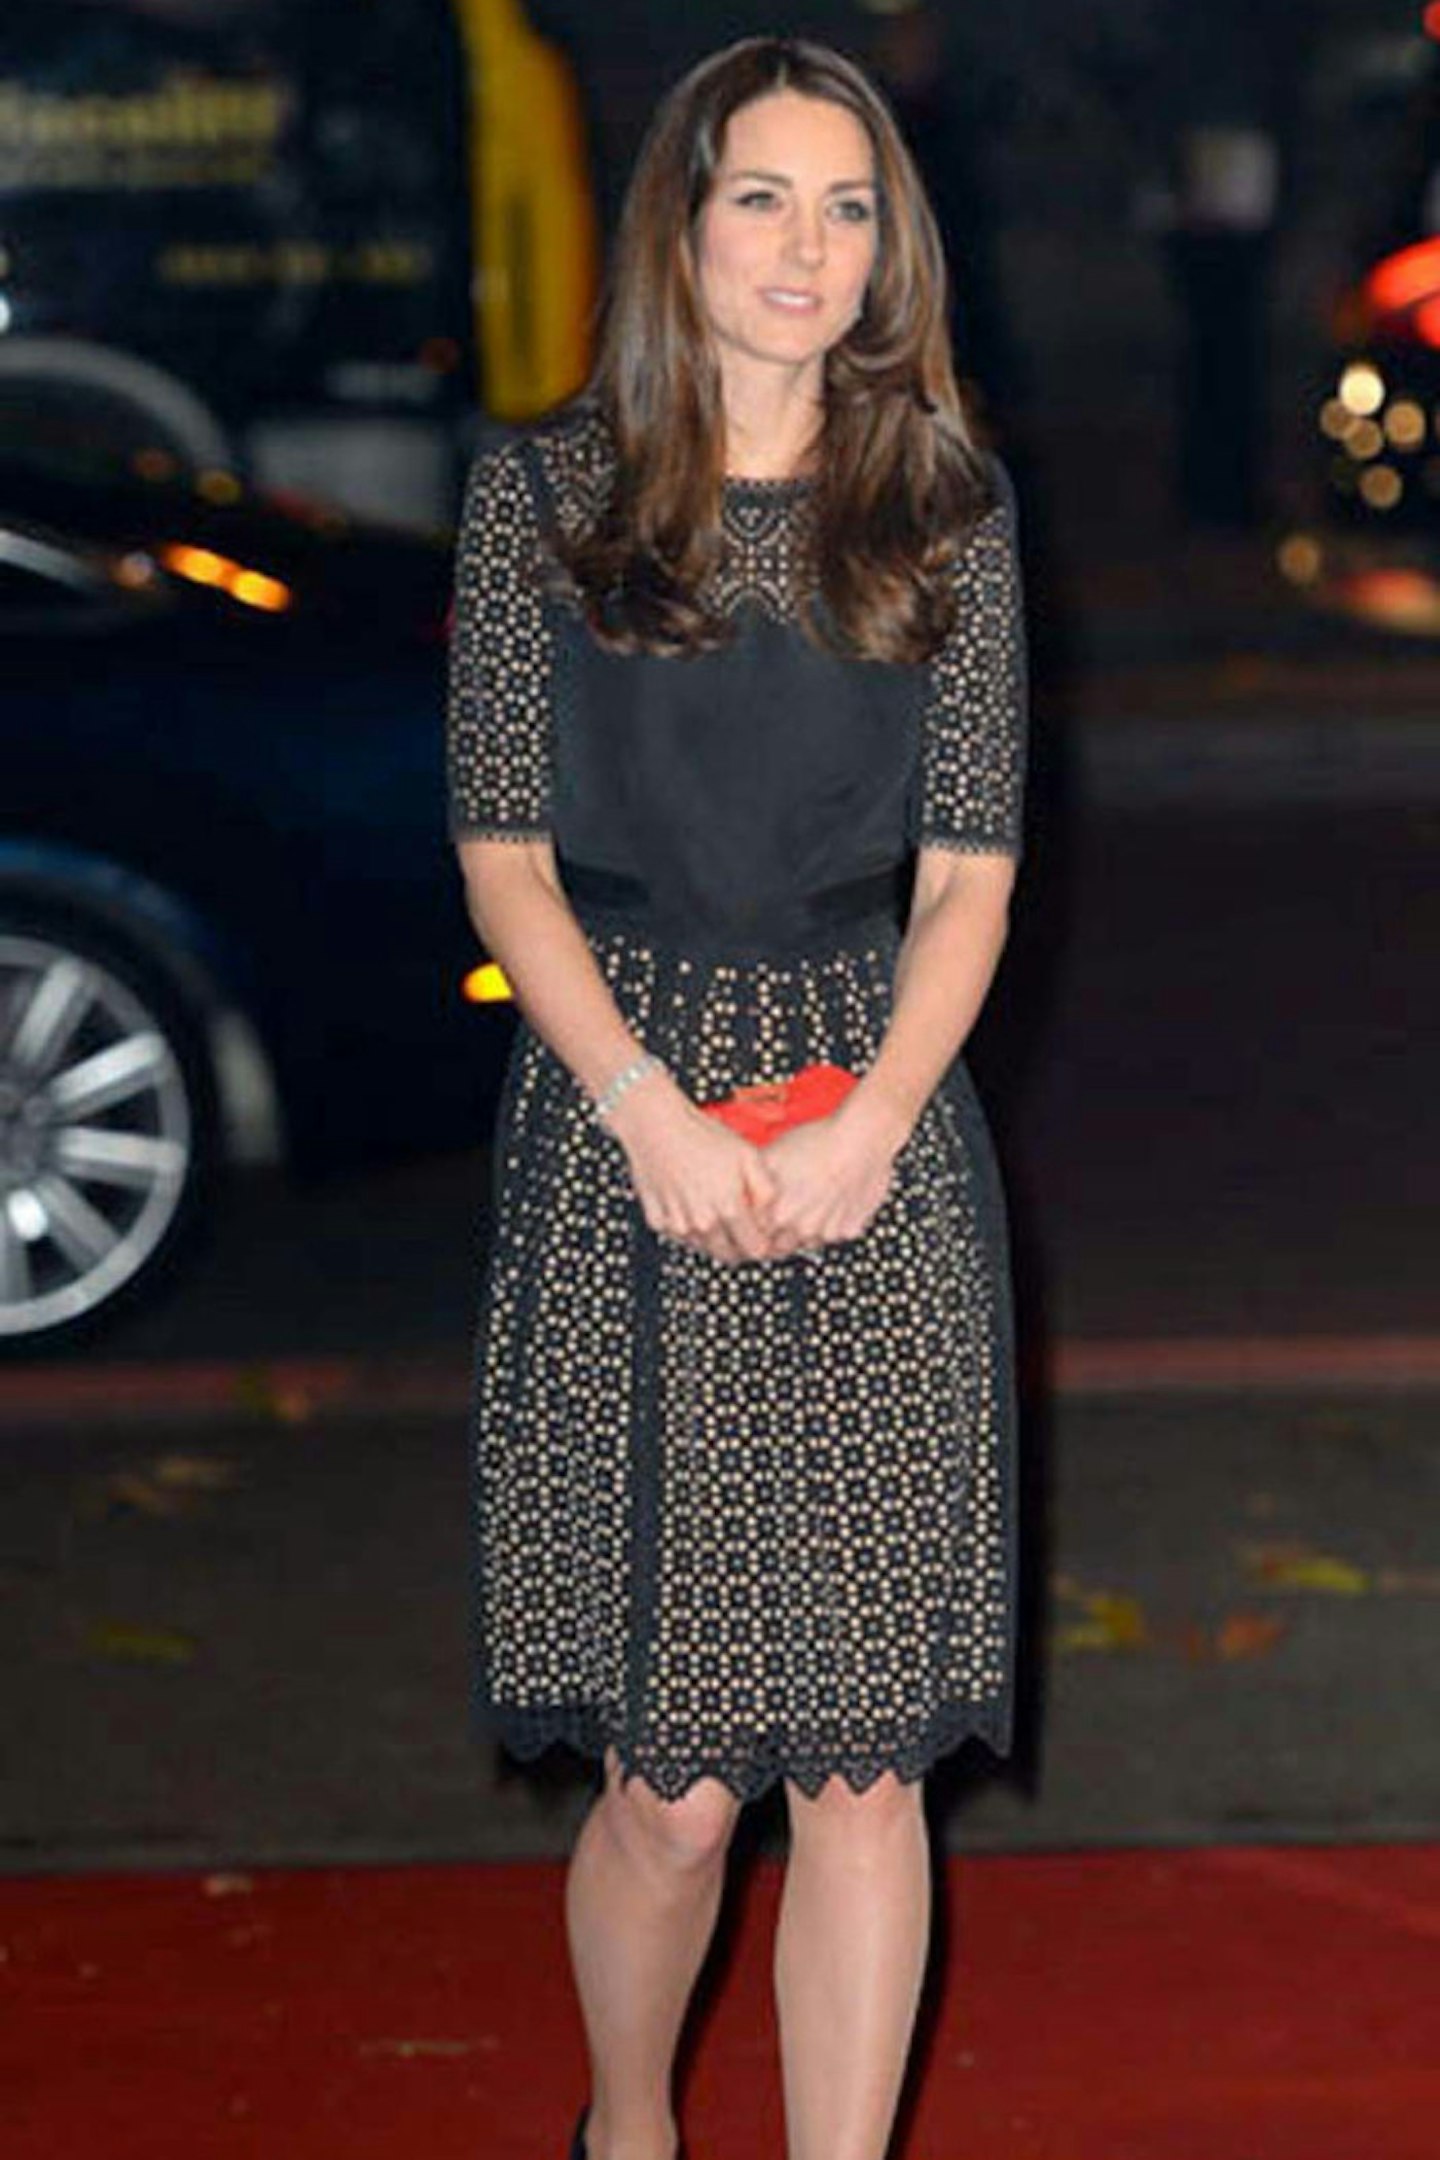 The Duchess of Cambridge in a Temperley London dress at the Sports Aid Ball, 28 November 2013